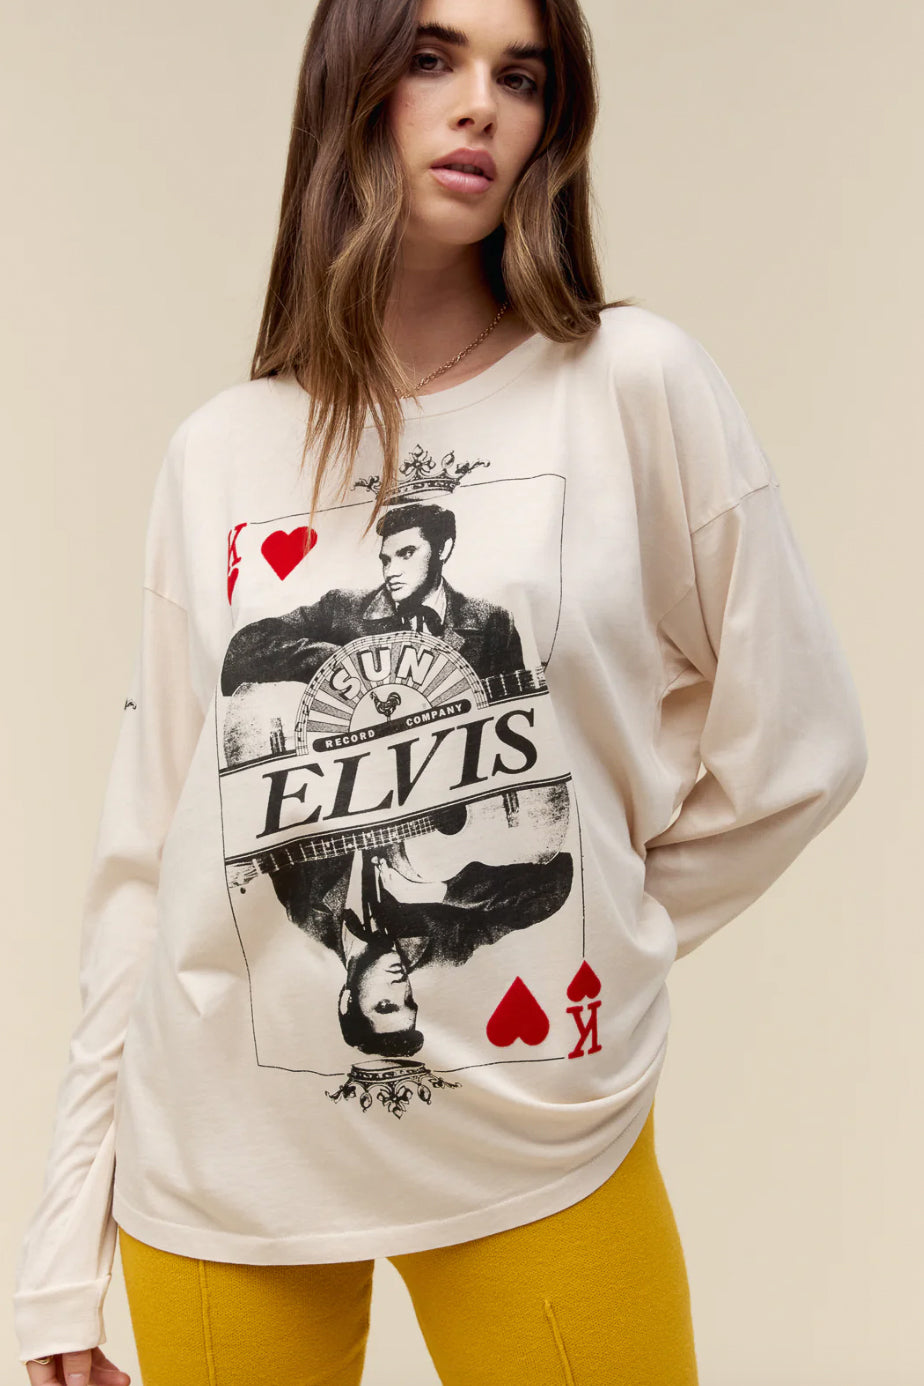 Sun Records X Elvis King Of Hearts Long Sleeve Merch - The Canyon